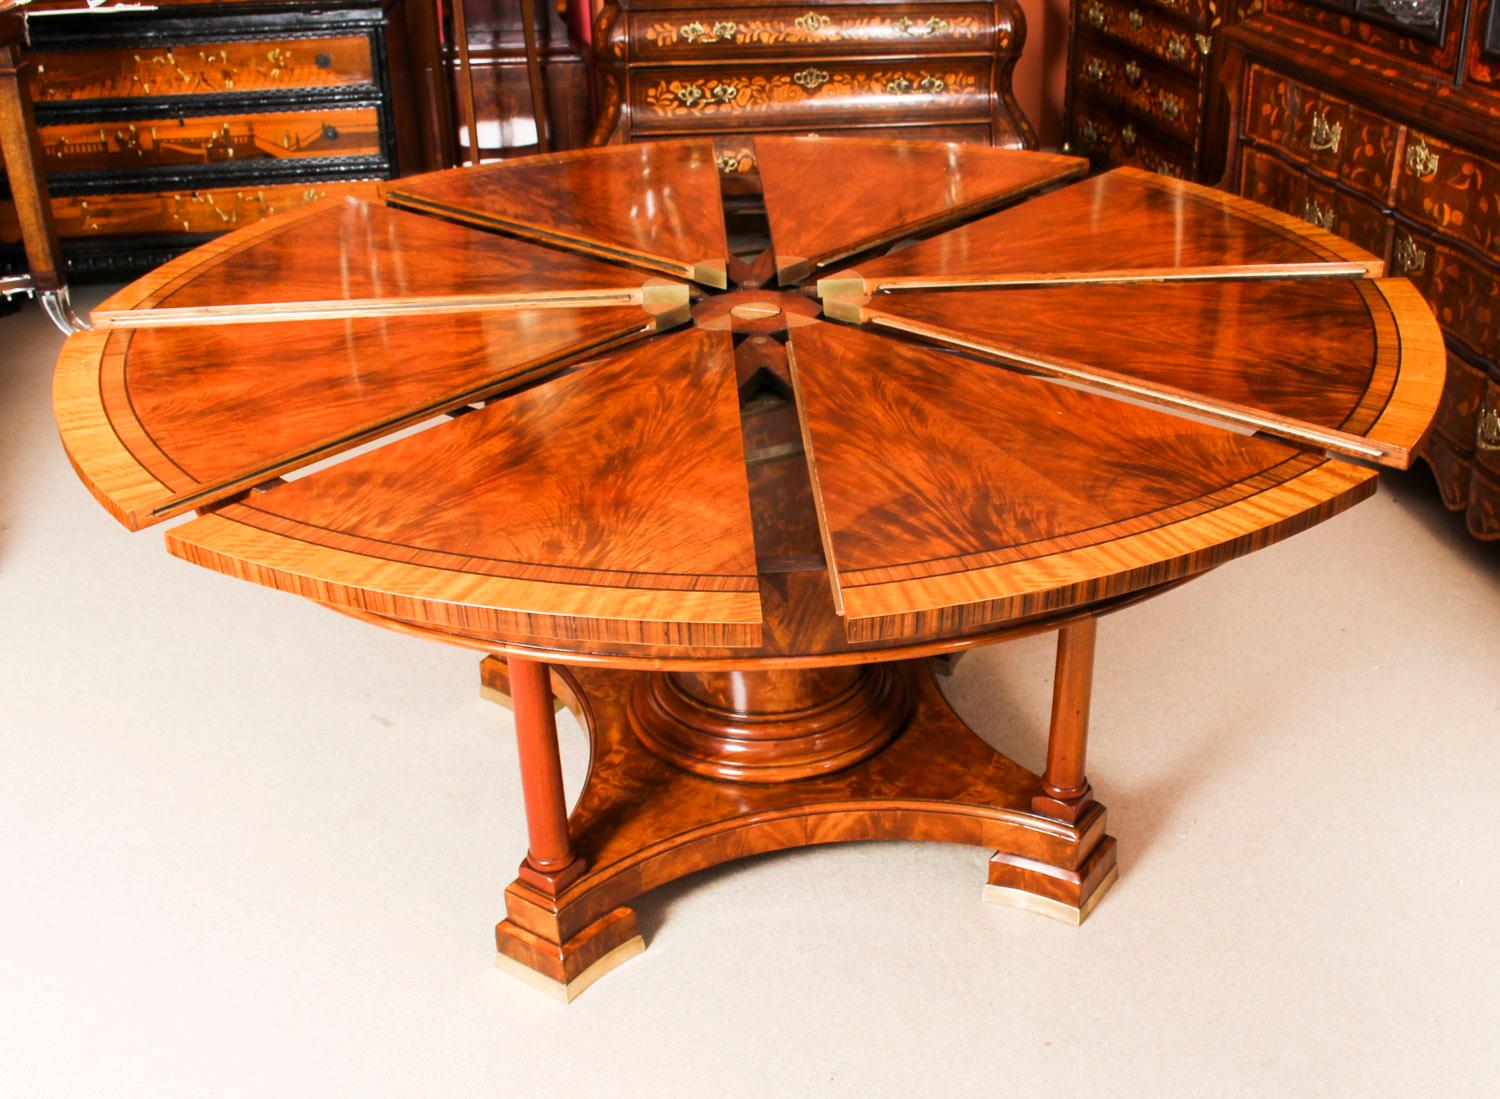 Flame Mahogany Jupe Dining Table Early 20th Century & 10 Antique Chairs 6